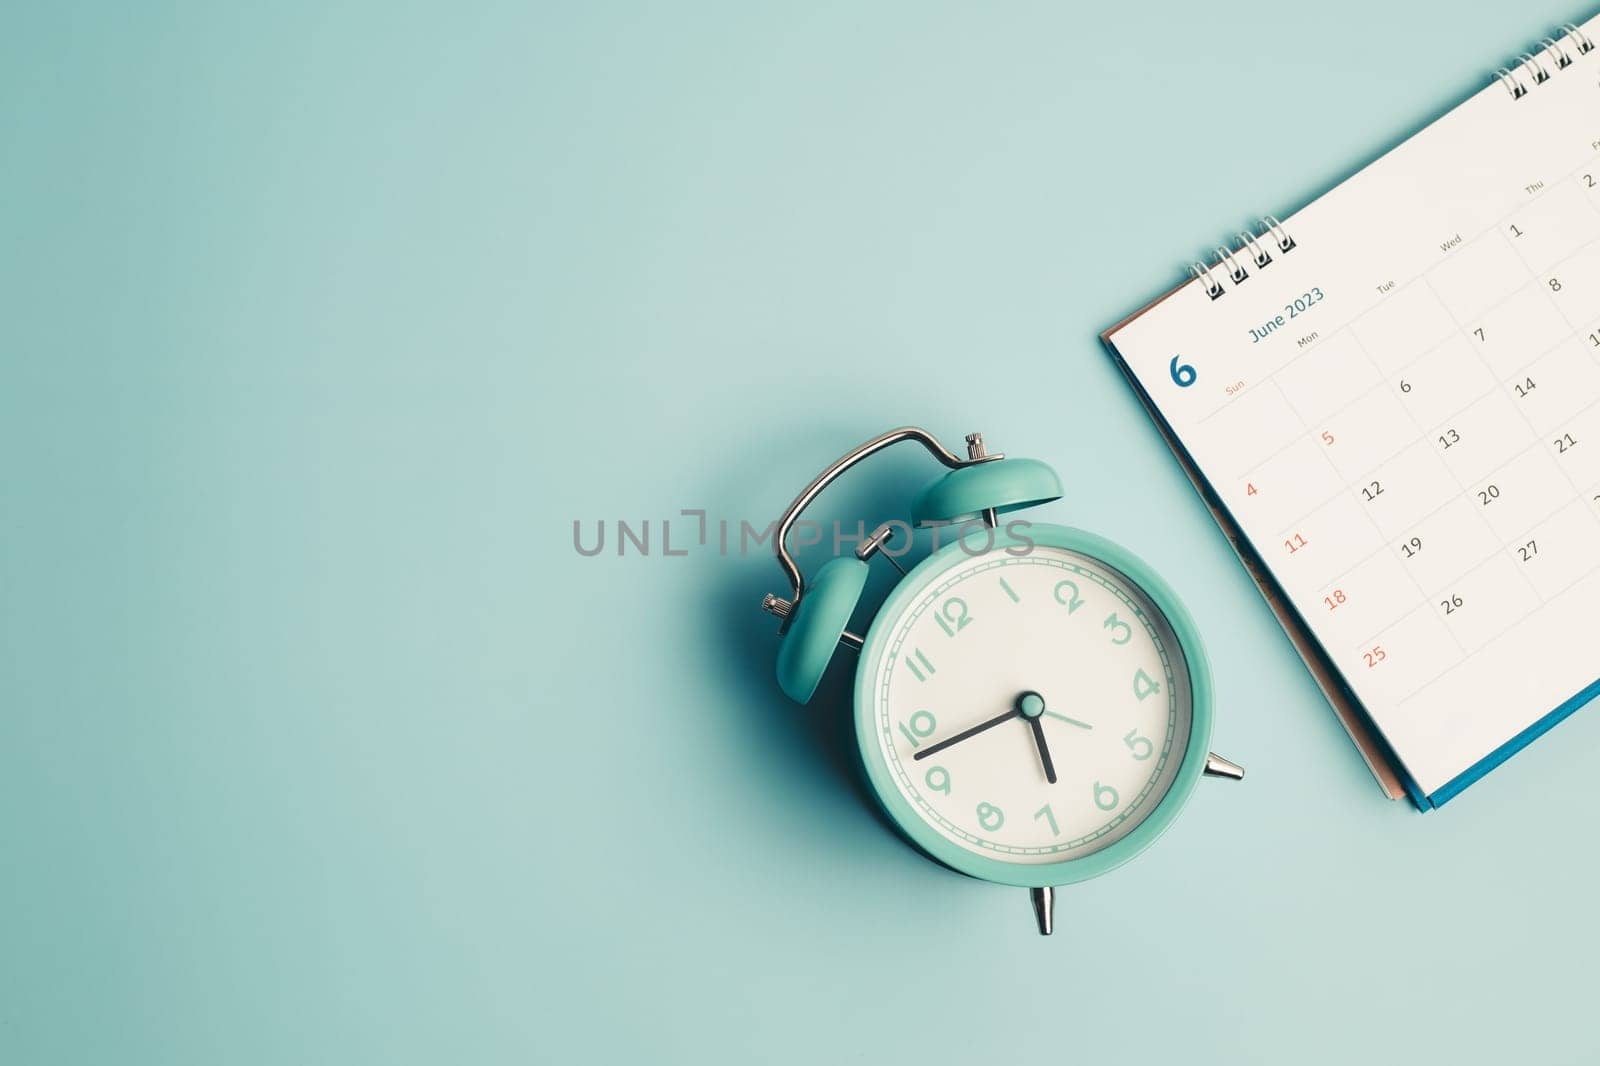 An alarm clock with calendar on blue background for the concept of time and date management.